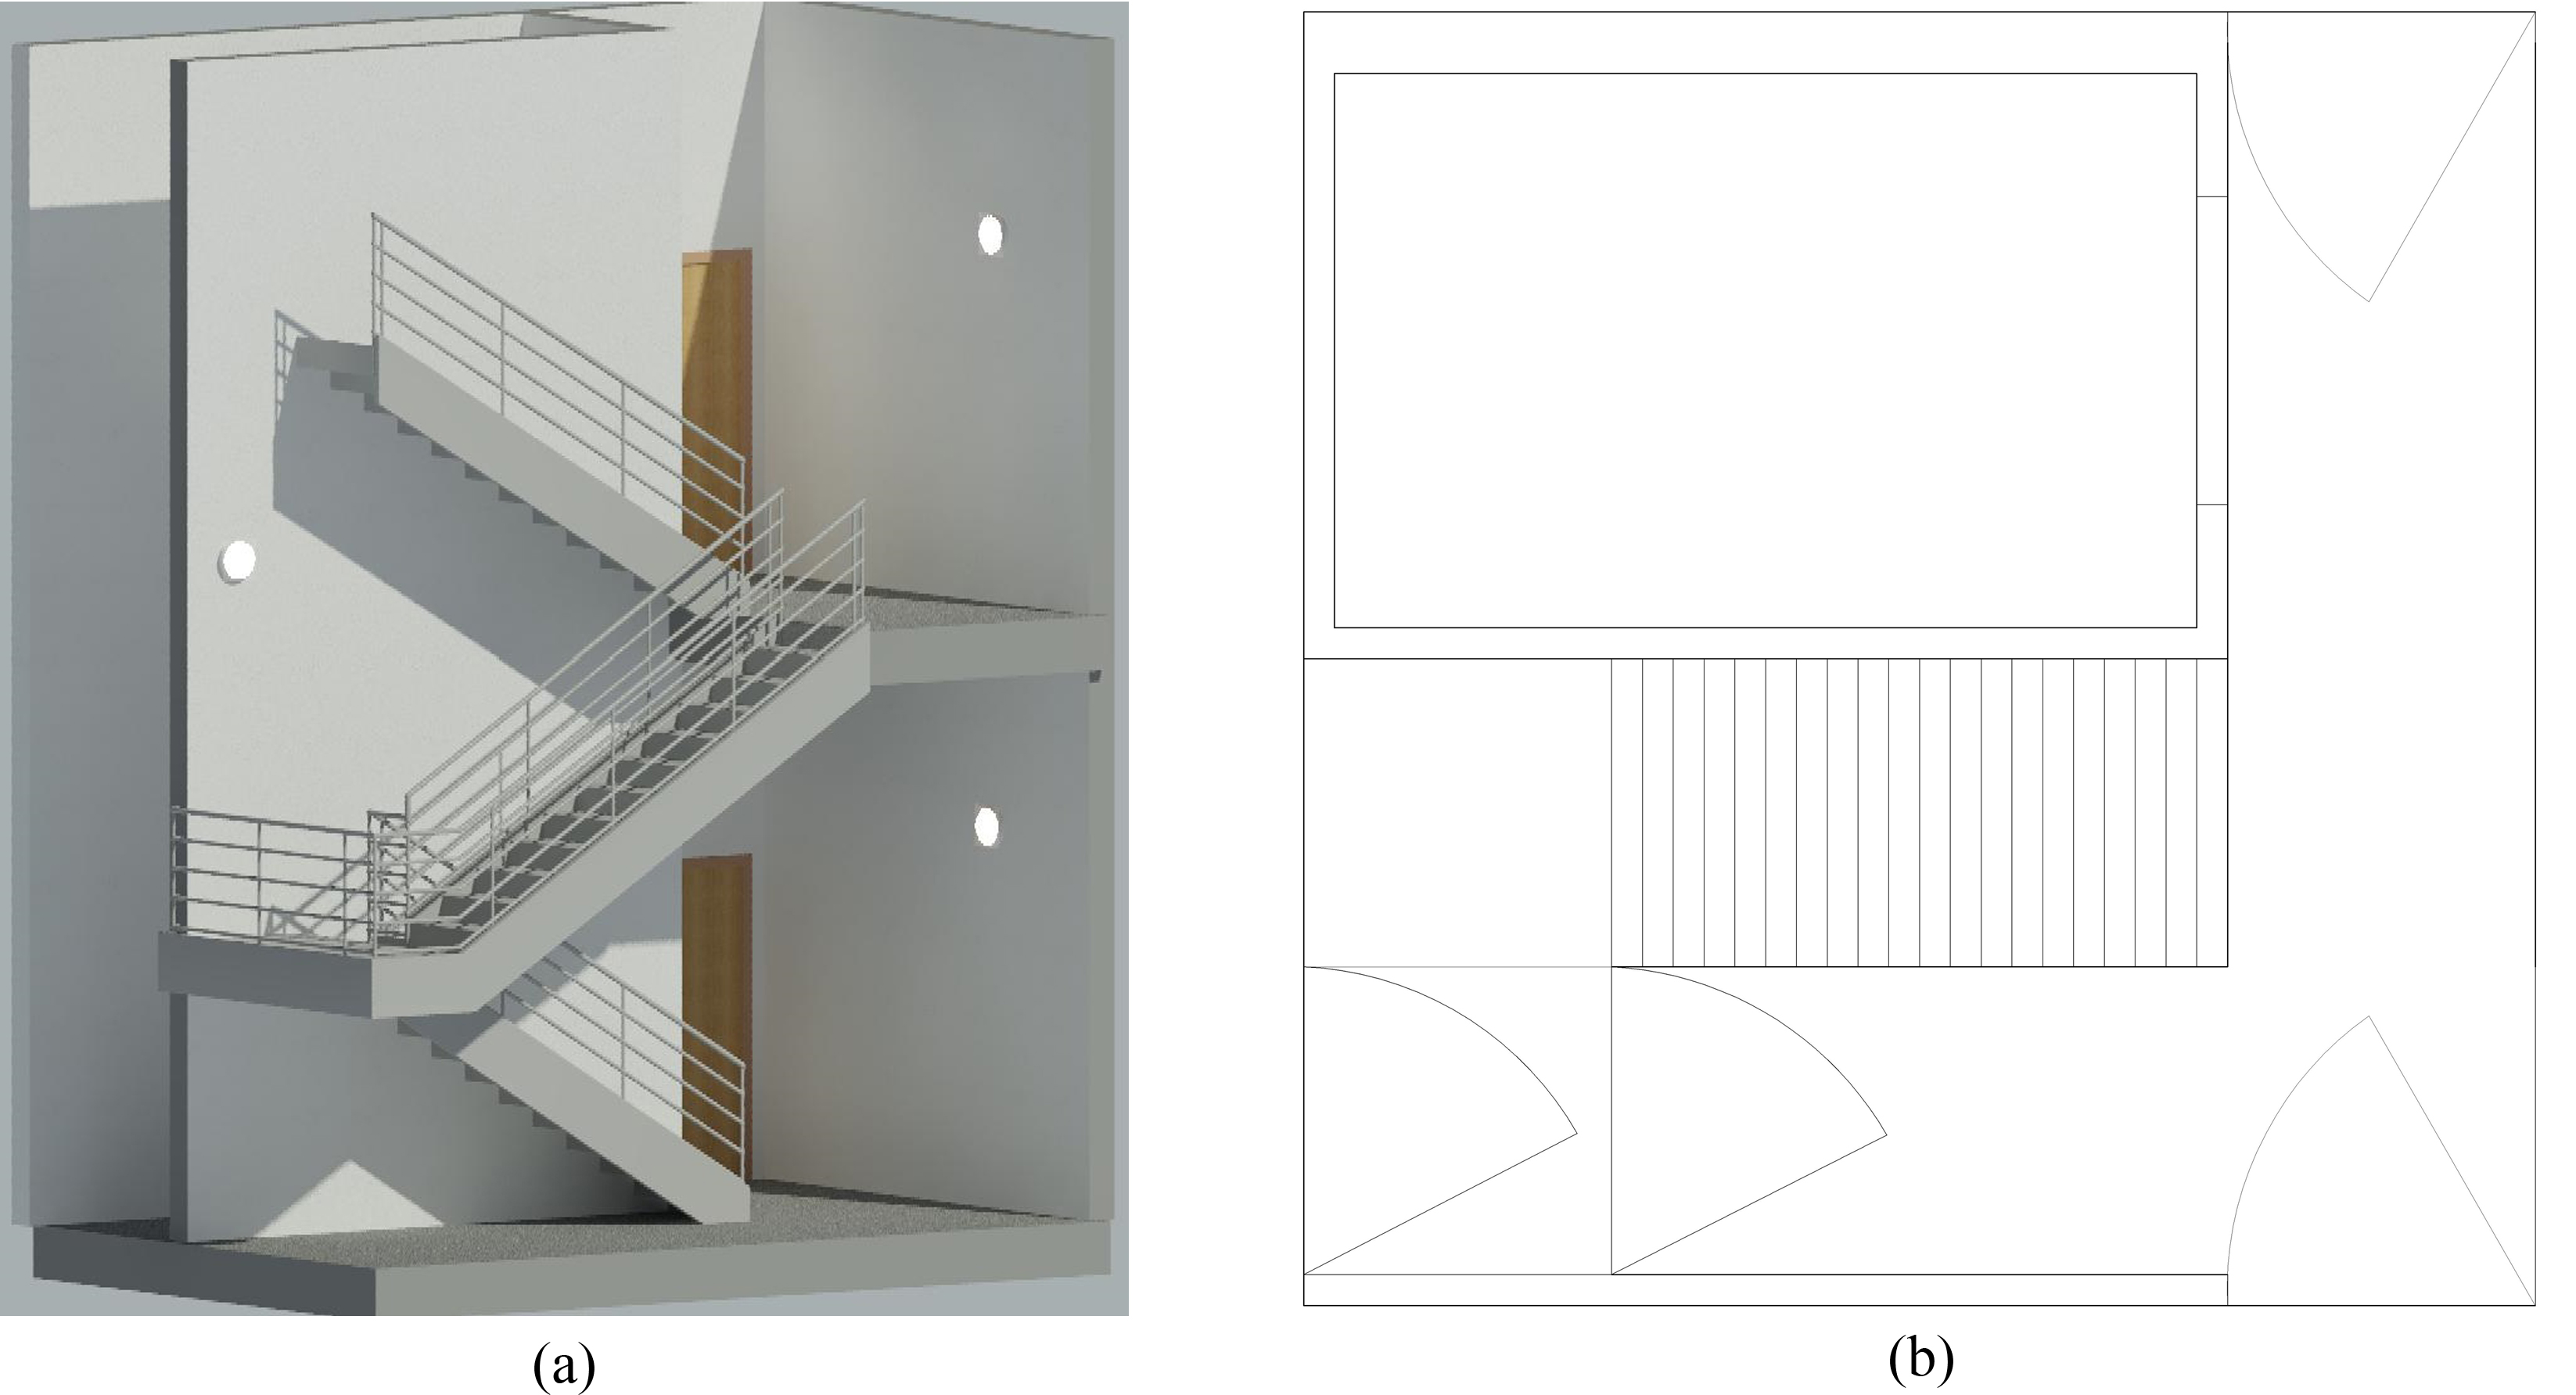 (a) Visual image of a typical stairwell and (b) the first floor stairwells plan.